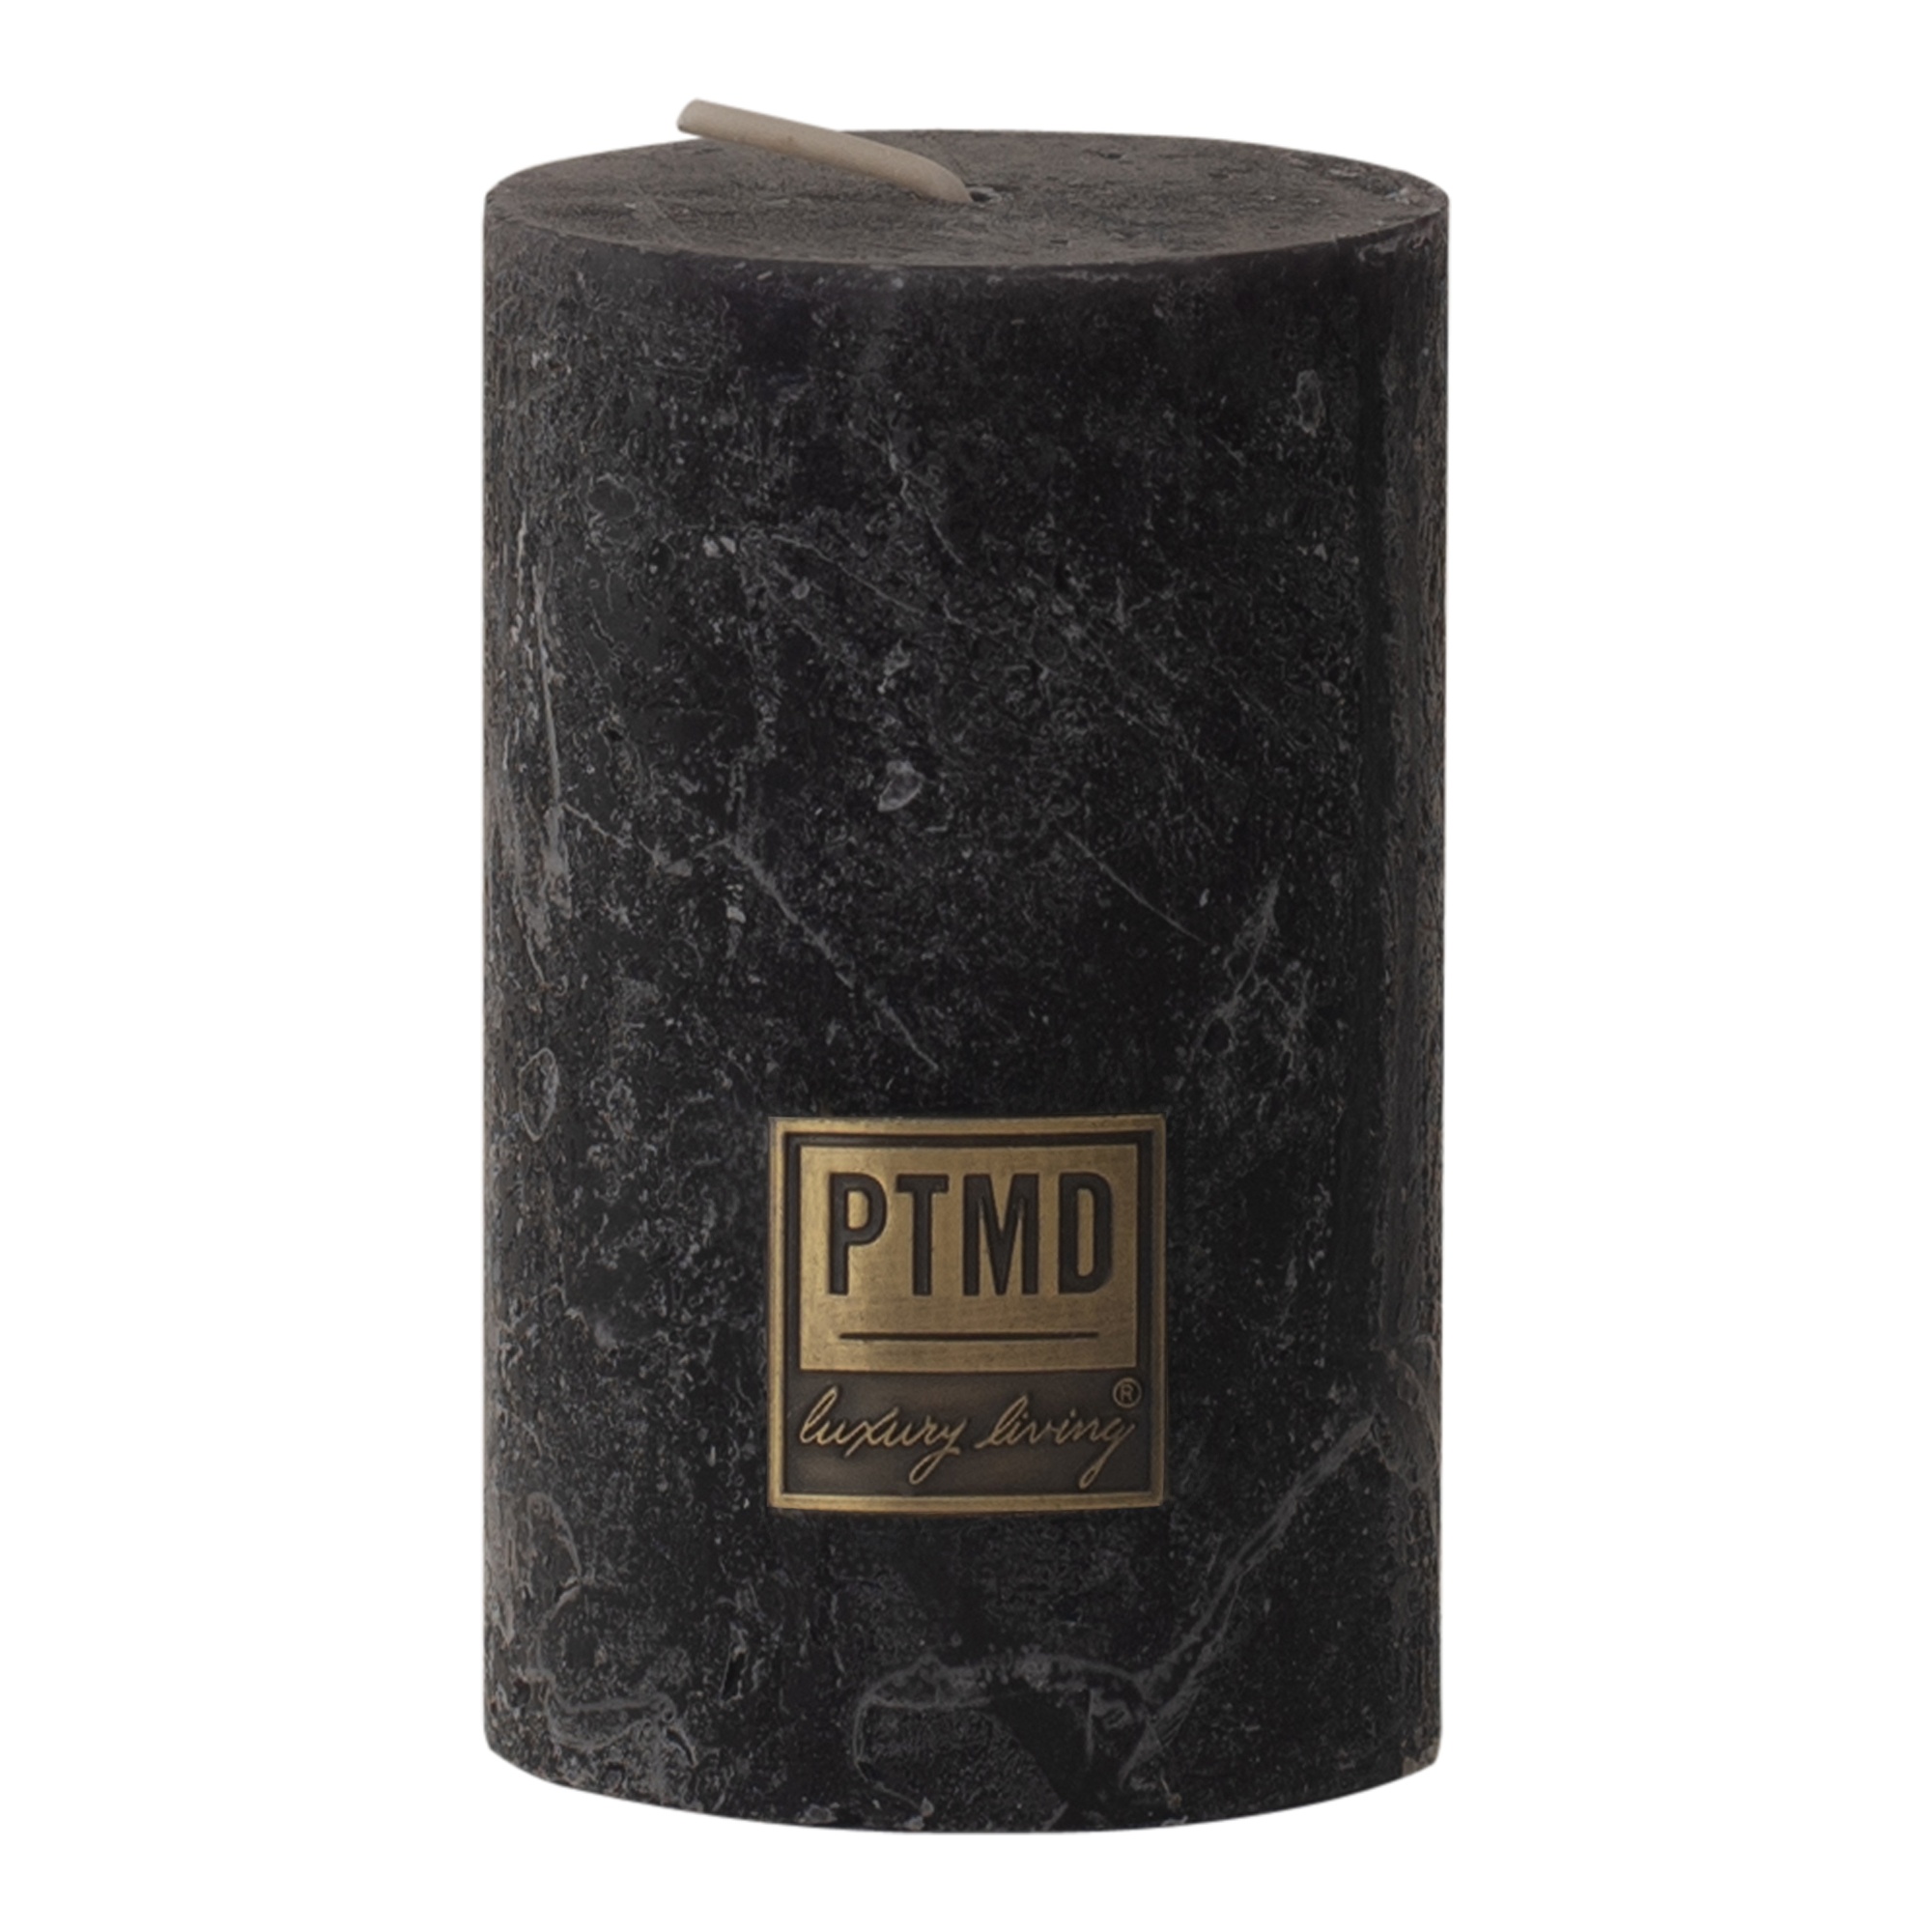 PTMD Rustic Charcoal Black Pillar Candle